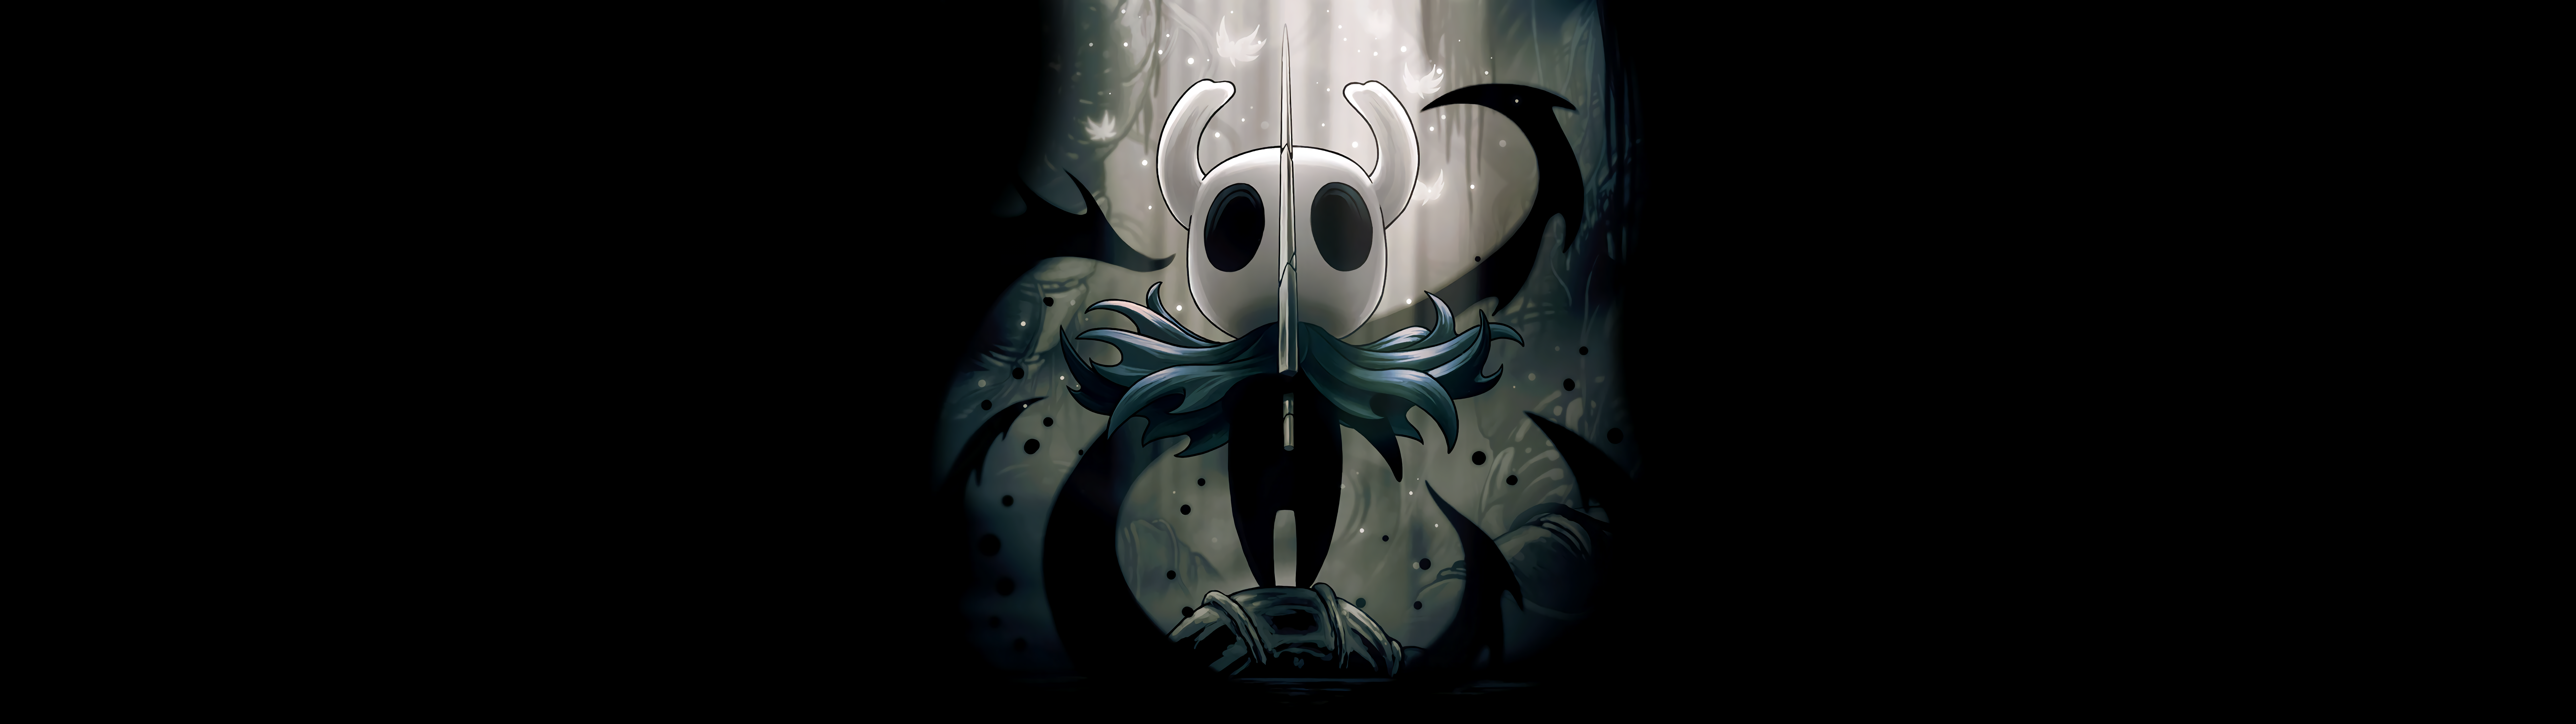 General 7680x2160 Hollow Knight video games 4K video game characters ultrawide minimalism simple background mask black background sword cape